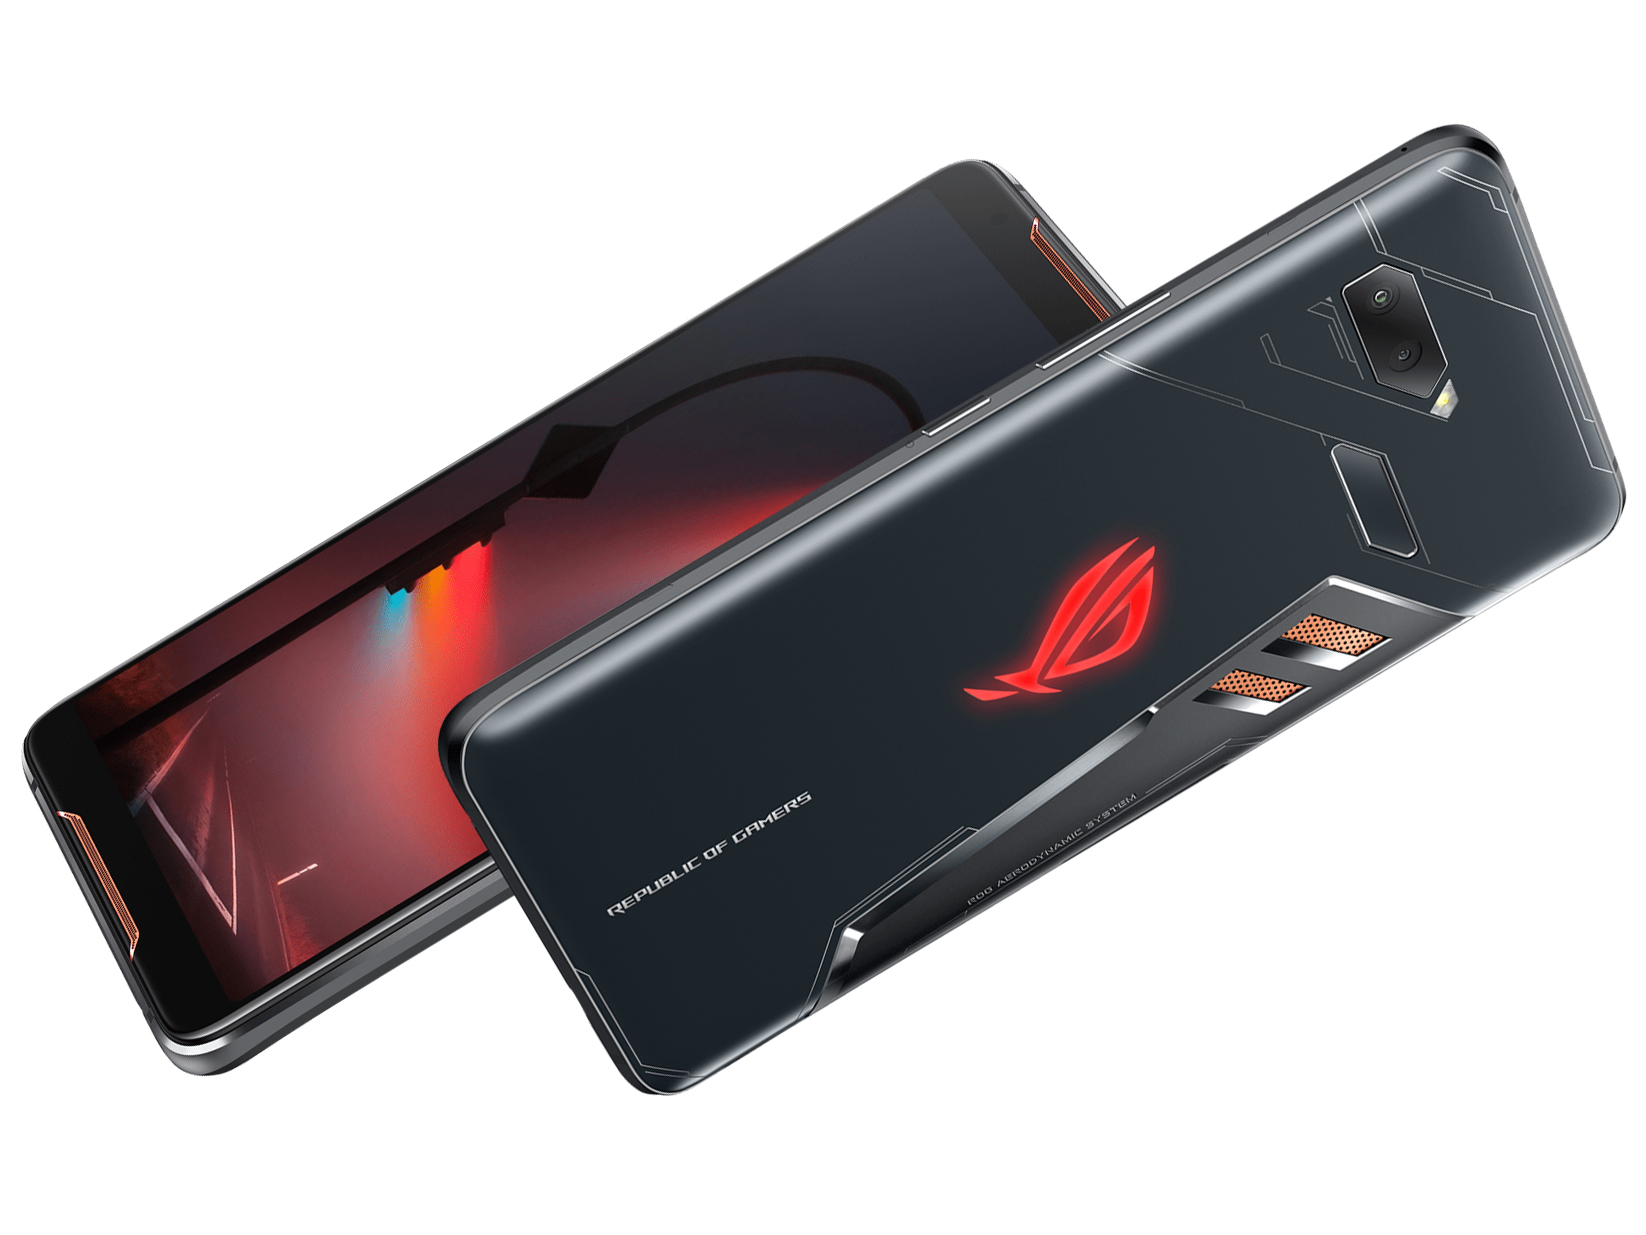 Asus ROG Phone 2 with Qualcomm 855 Plus unveiled: Know specs and features